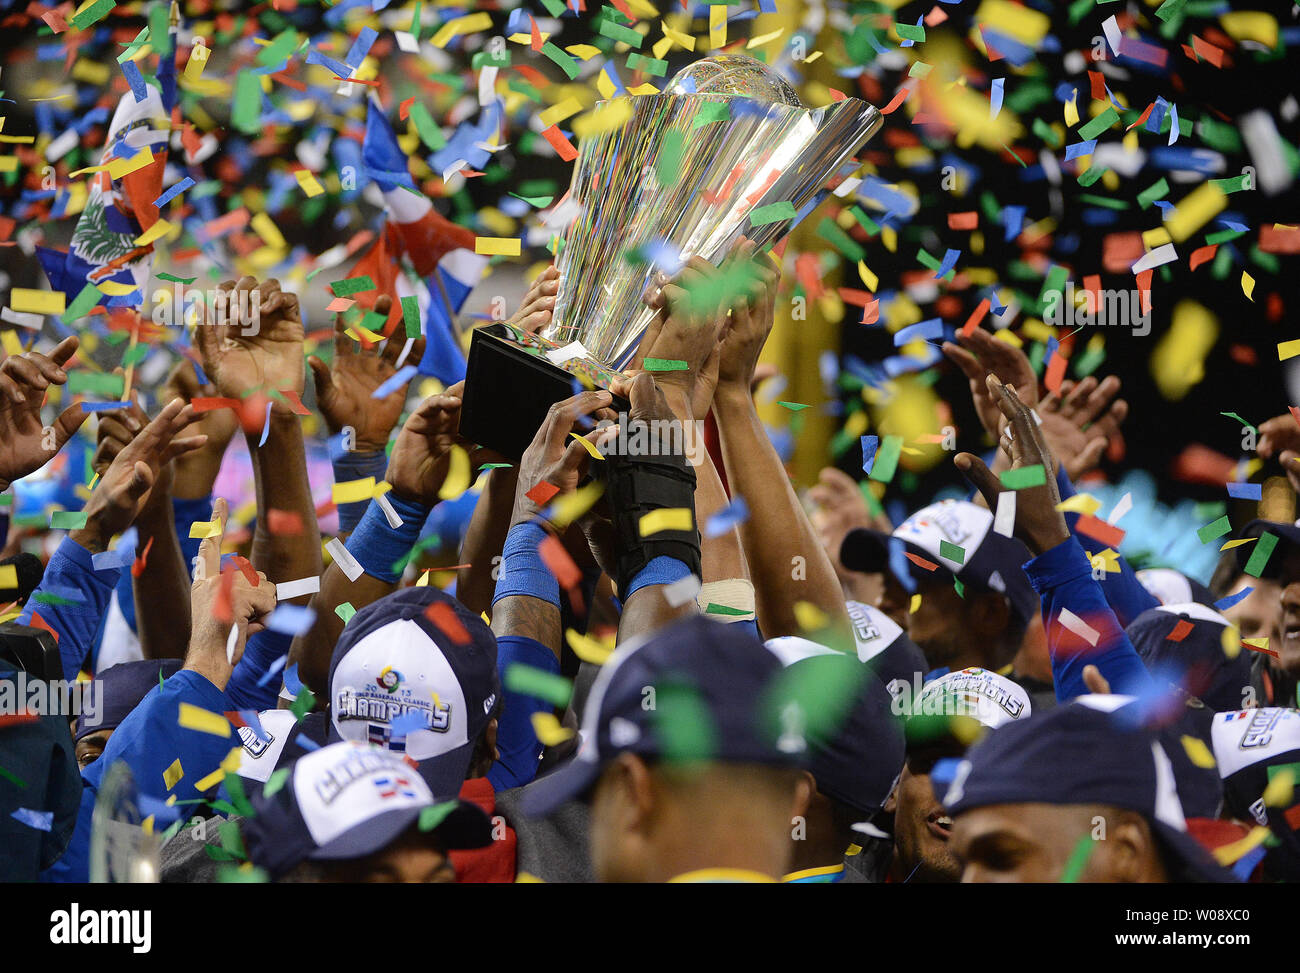 The Dominican Republic baseball team celebrates with the championship trophy at the World Baseball Classic championship at AT&T Park in San Francisco on March 19, 2013.  Dominican Republic beat Puerto Rico 3-0 to win the WBC tourney.     UPI/Terry Schmitt Stock Photo